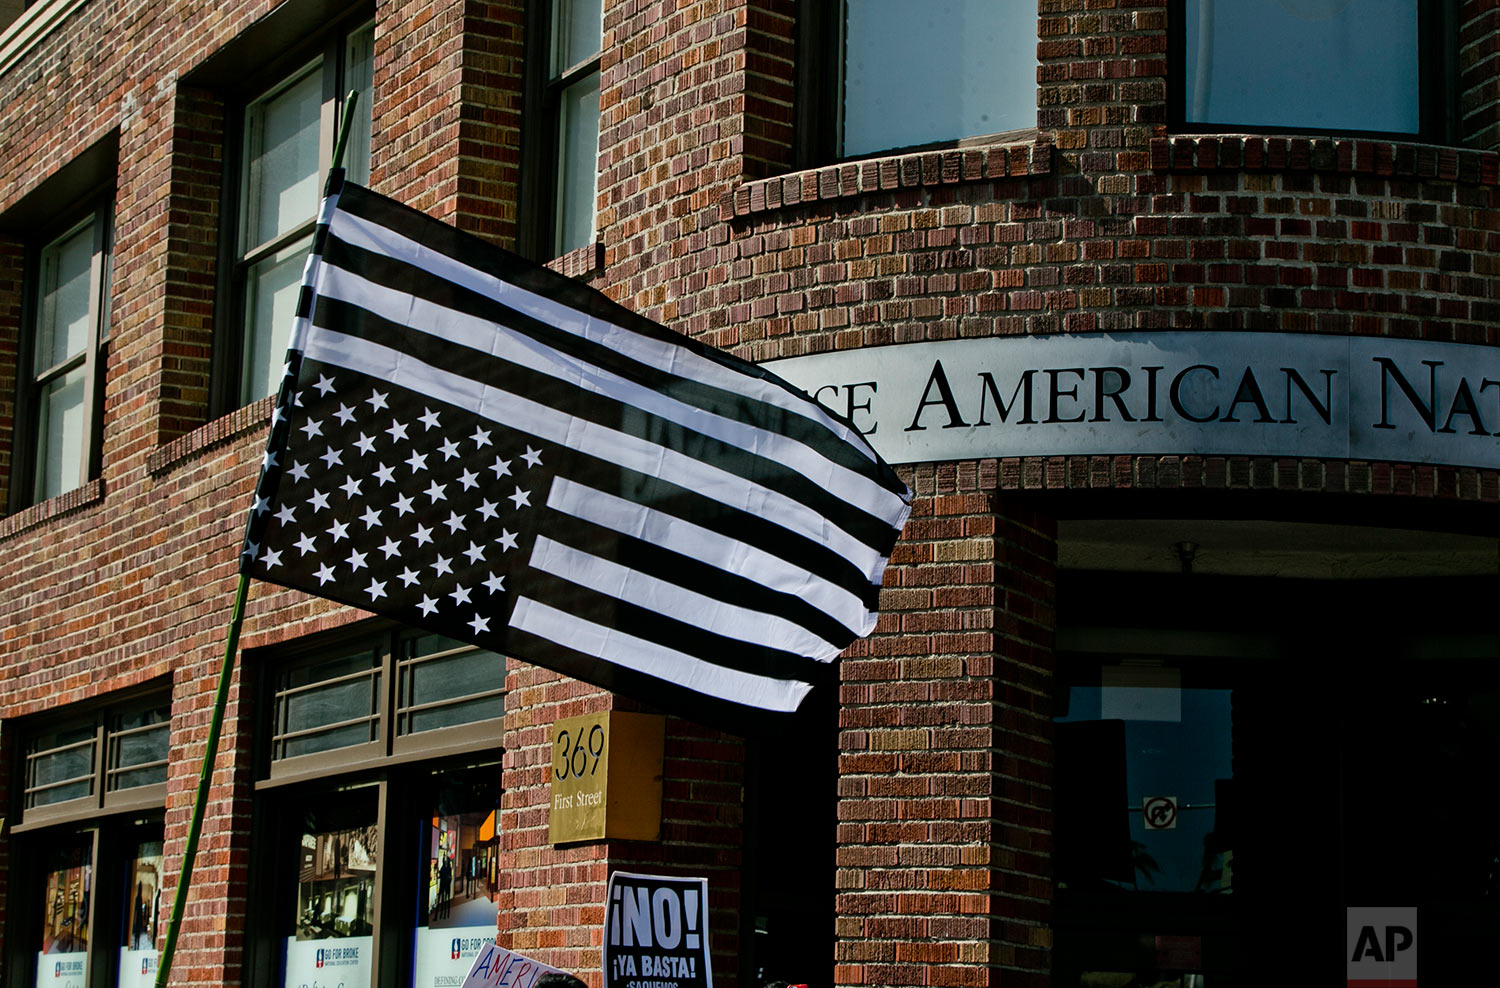  Protesters carry an upside down U.S. flag outside the Japanese American Museum in downtown Los Angeles on Sunday, Aug. 13, 2017 Protesters decrying hatred and racism converged around the country Sunday, the day after a white supremacist rally that s